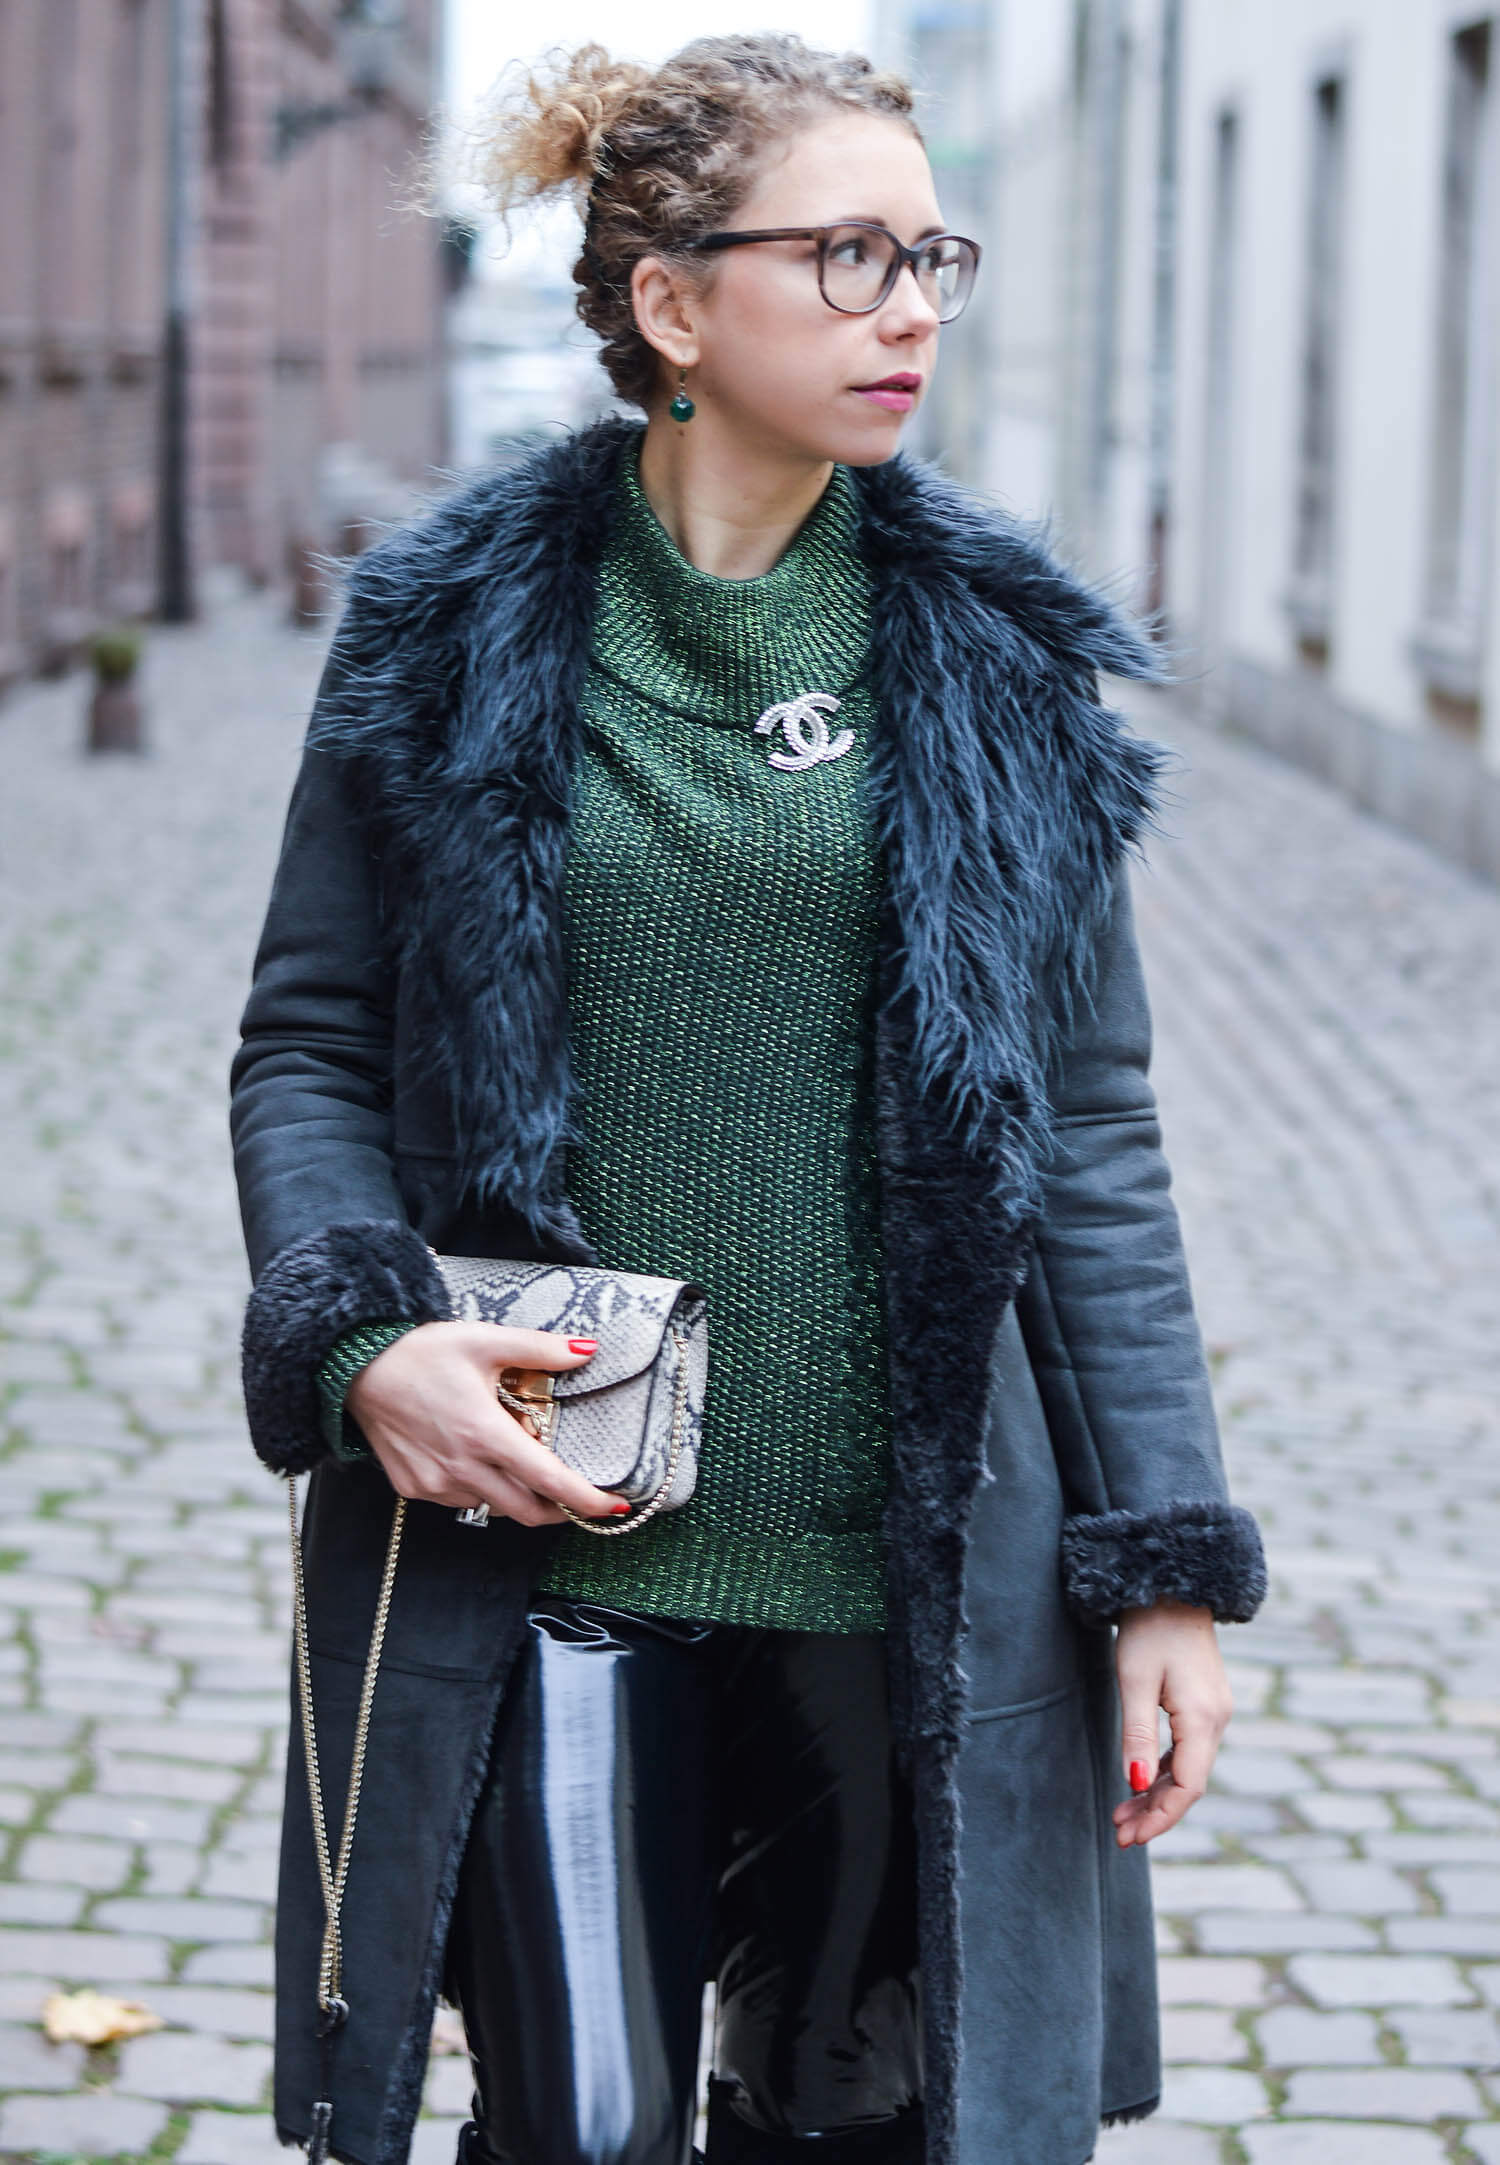 Kationette-fashionblogger-nrw-Outfit-Winter-Fashion-with-Green-Knit-Vinyl-Shearling-Coat-and-Overknees